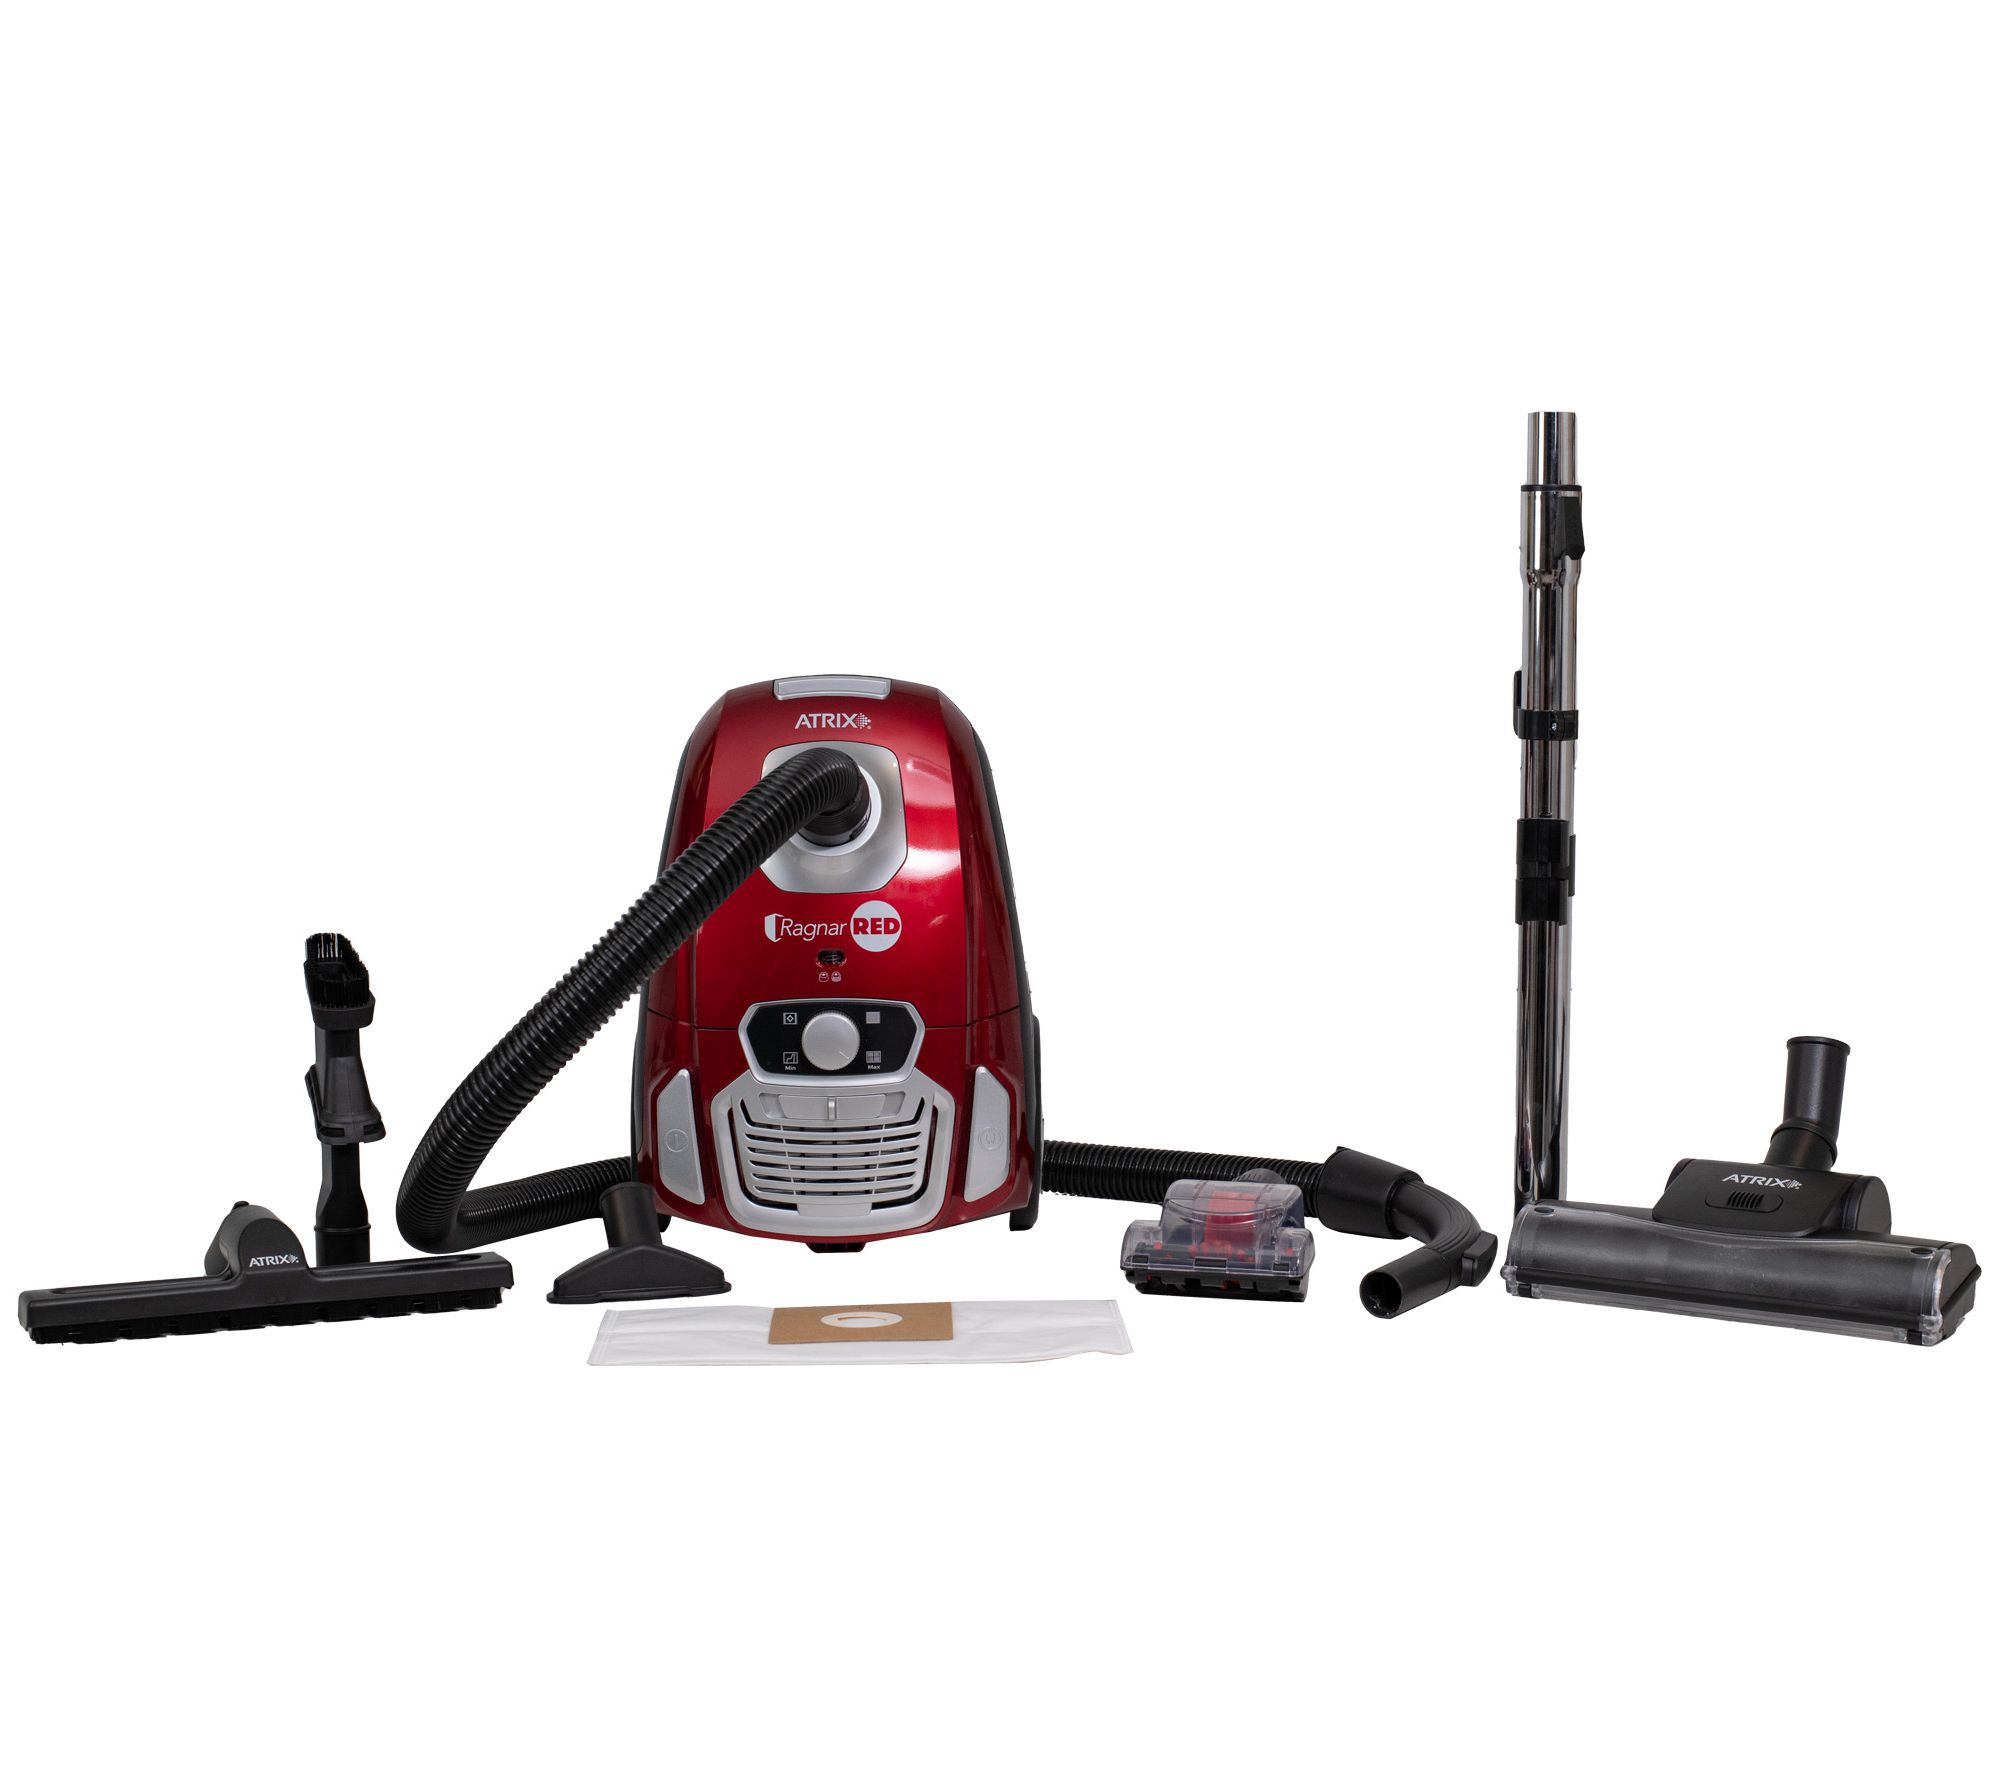 Aspirateur Rowenta Silence Force Compact Rouge